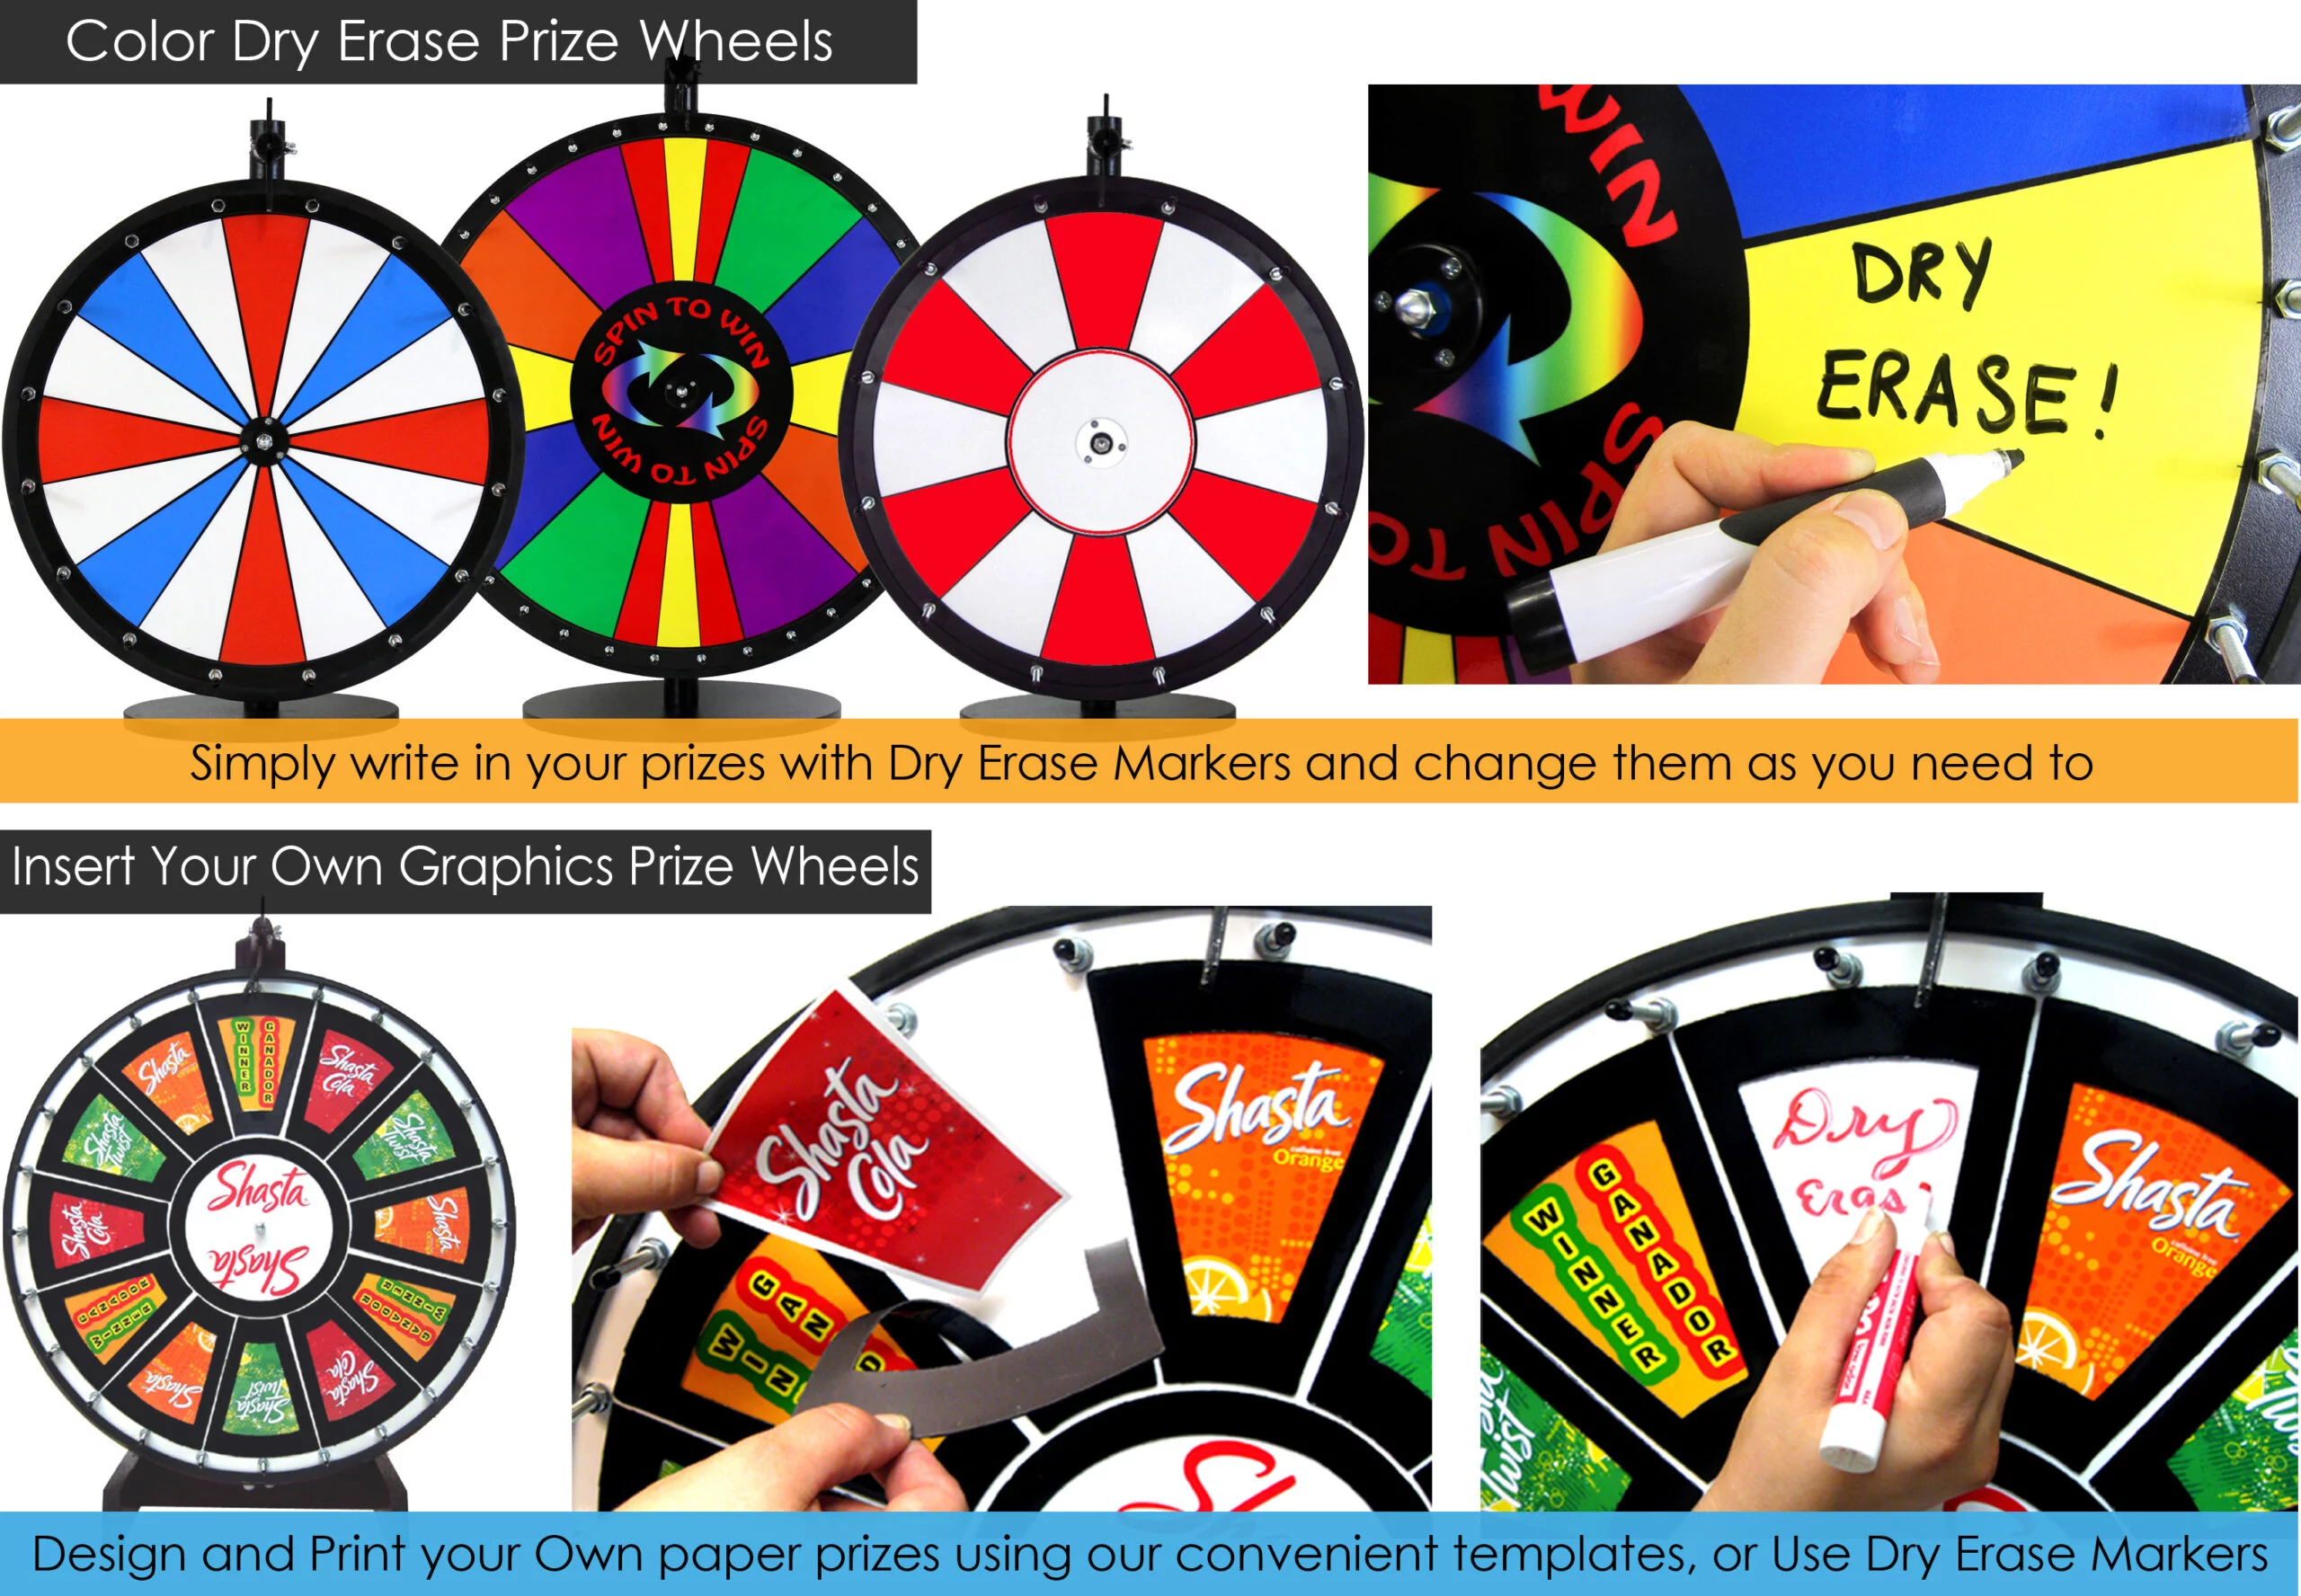 Top Creative Uses For A Winspin Prize Wheel By Spinning wheel